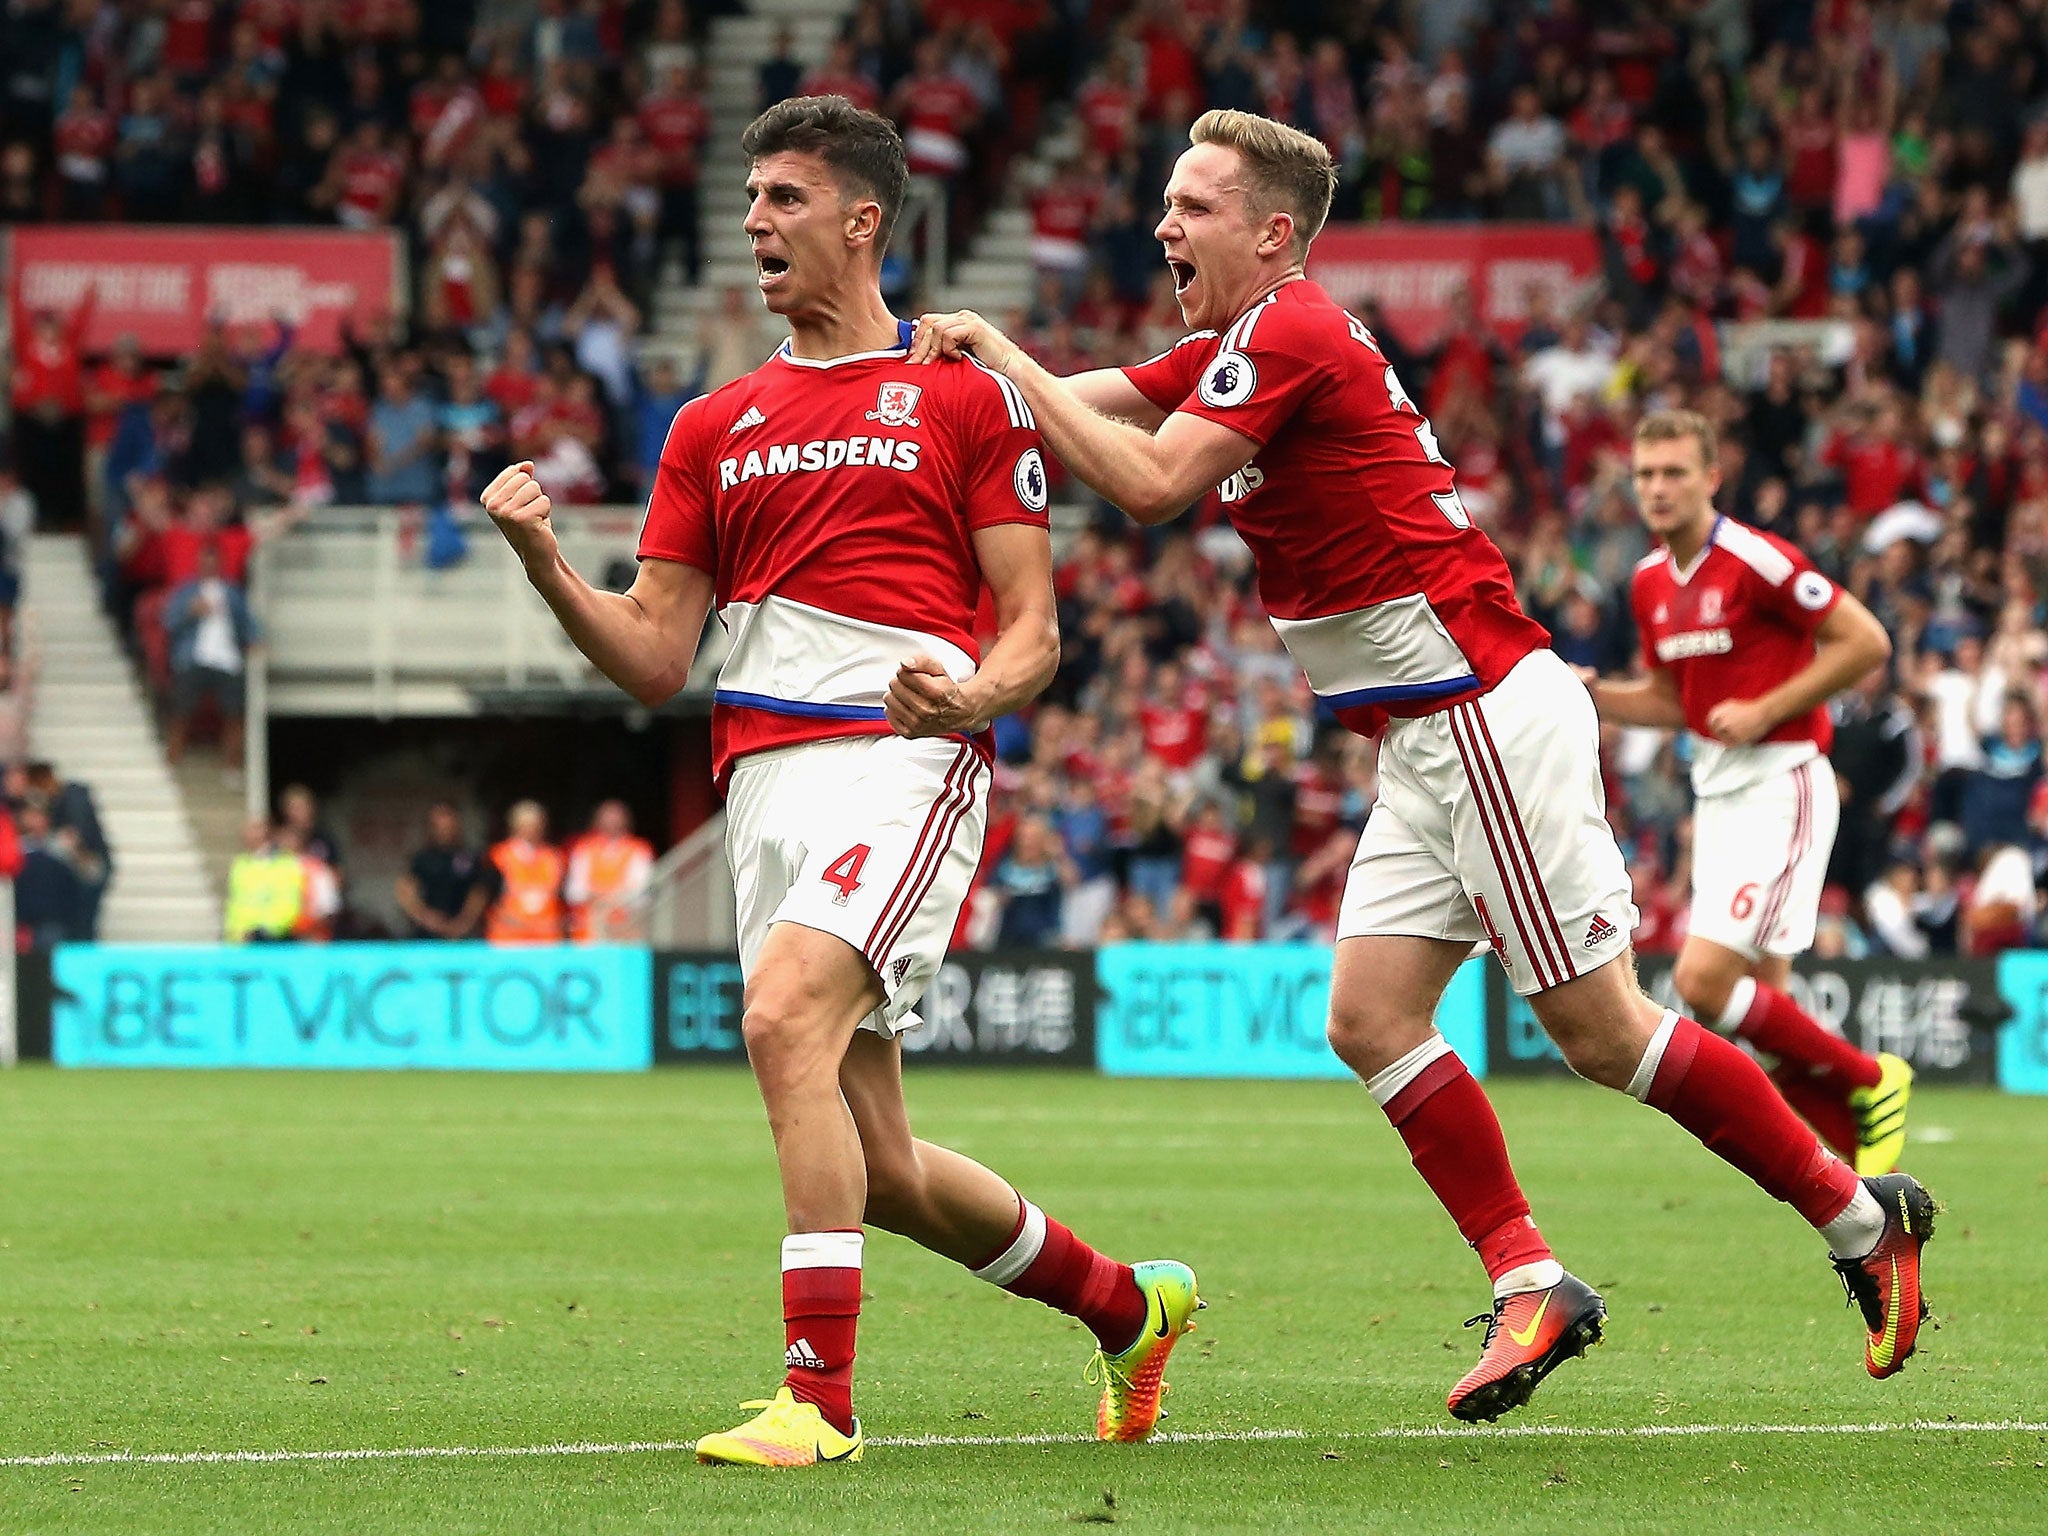 Boro's recent draws with Arsenal and City has given them a new belief